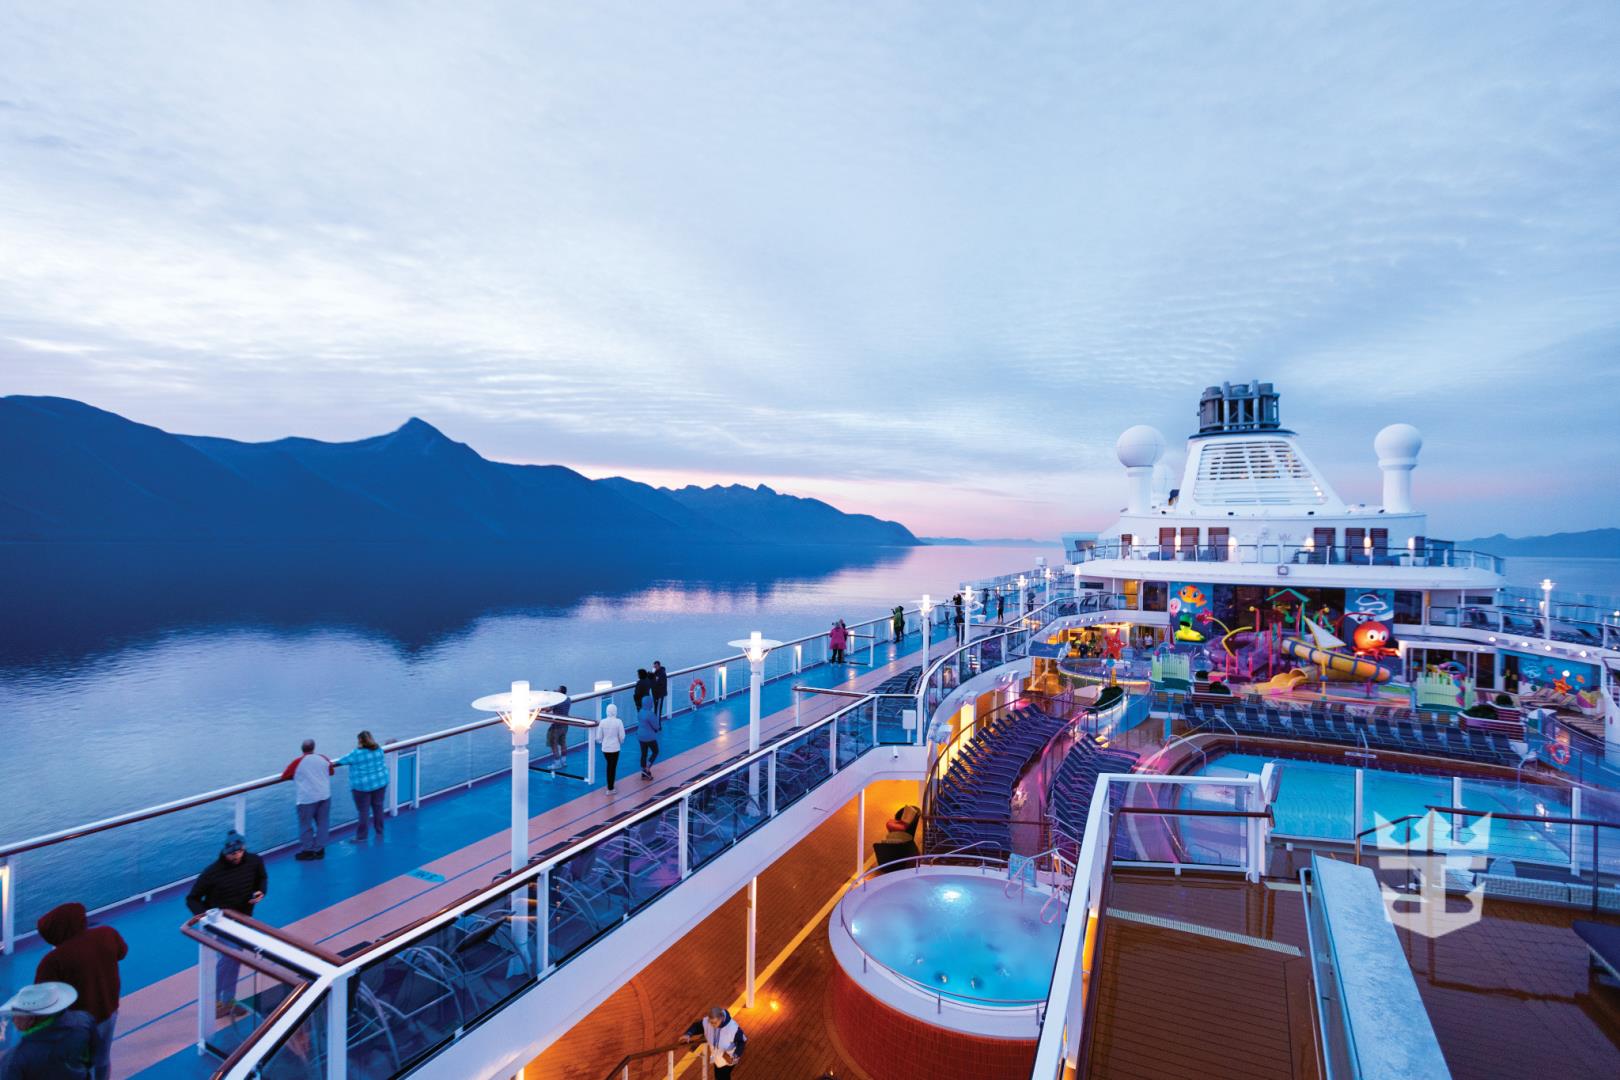 Aerial view of passengers on pool deck at sunset - Photo Credit: N Morley